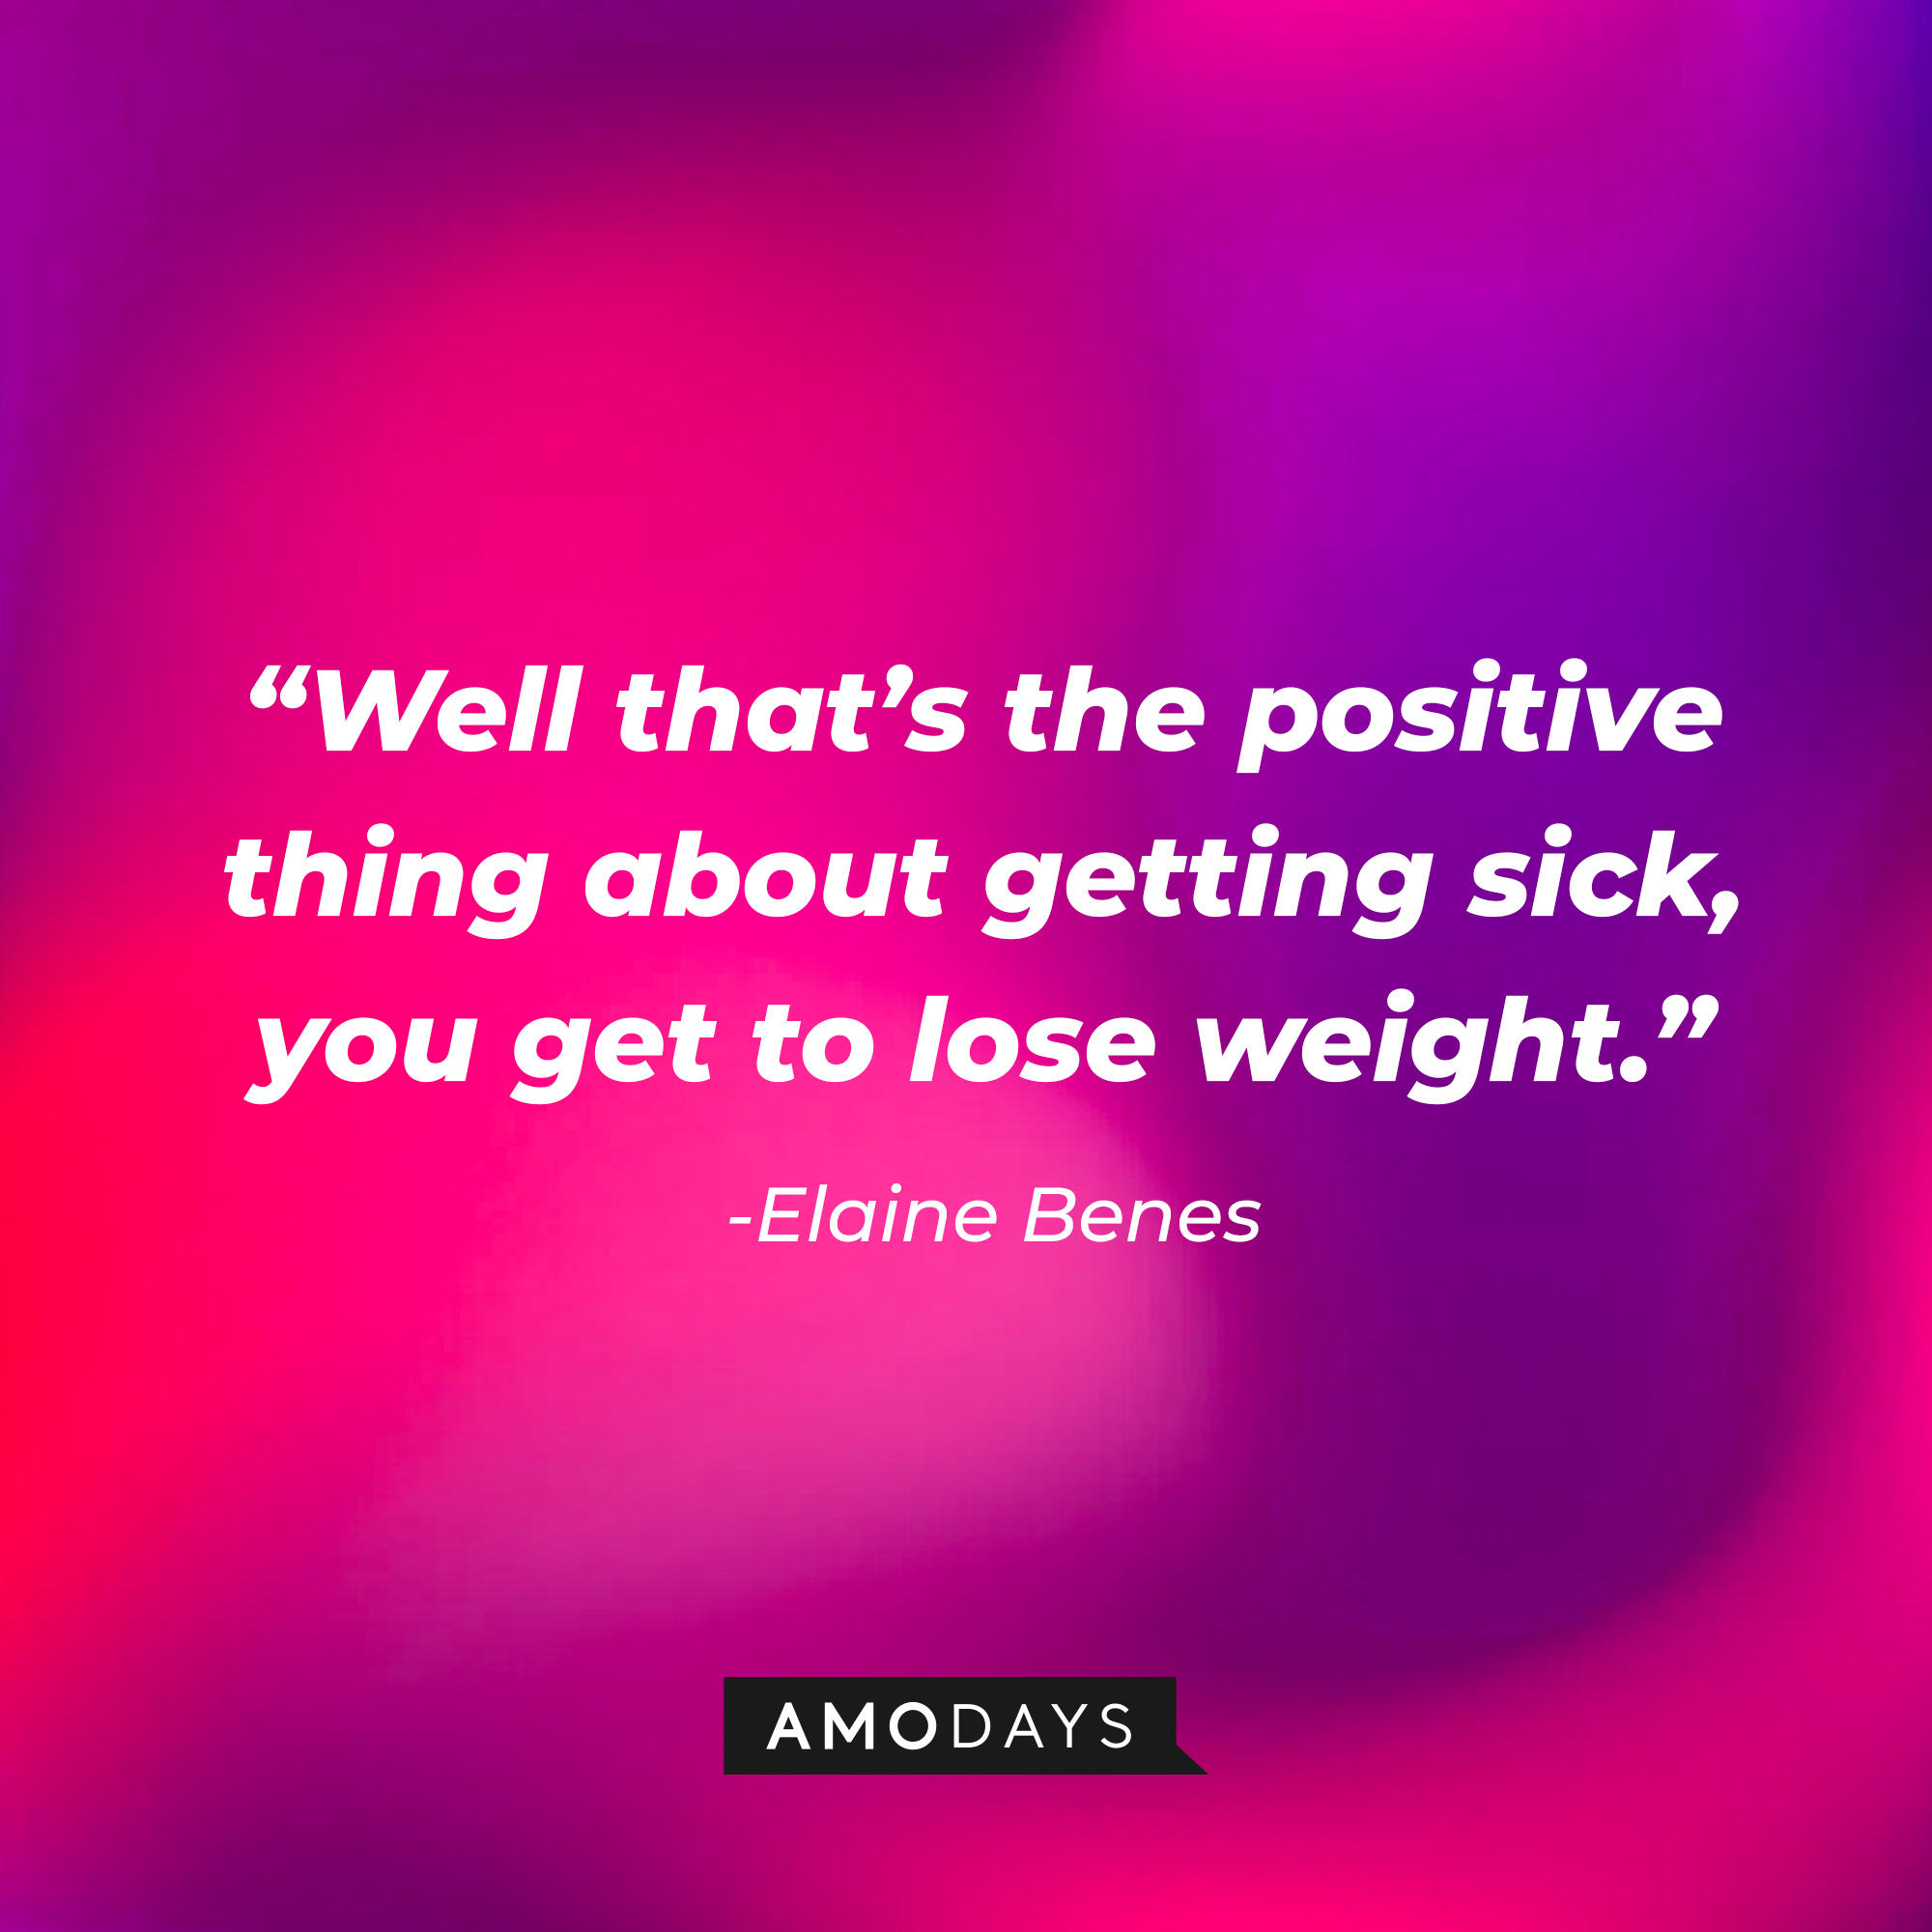 Elaine Benes quote: “Well that’s the positive thing about getting sick, you get to lose weight.” | Source: Amodays